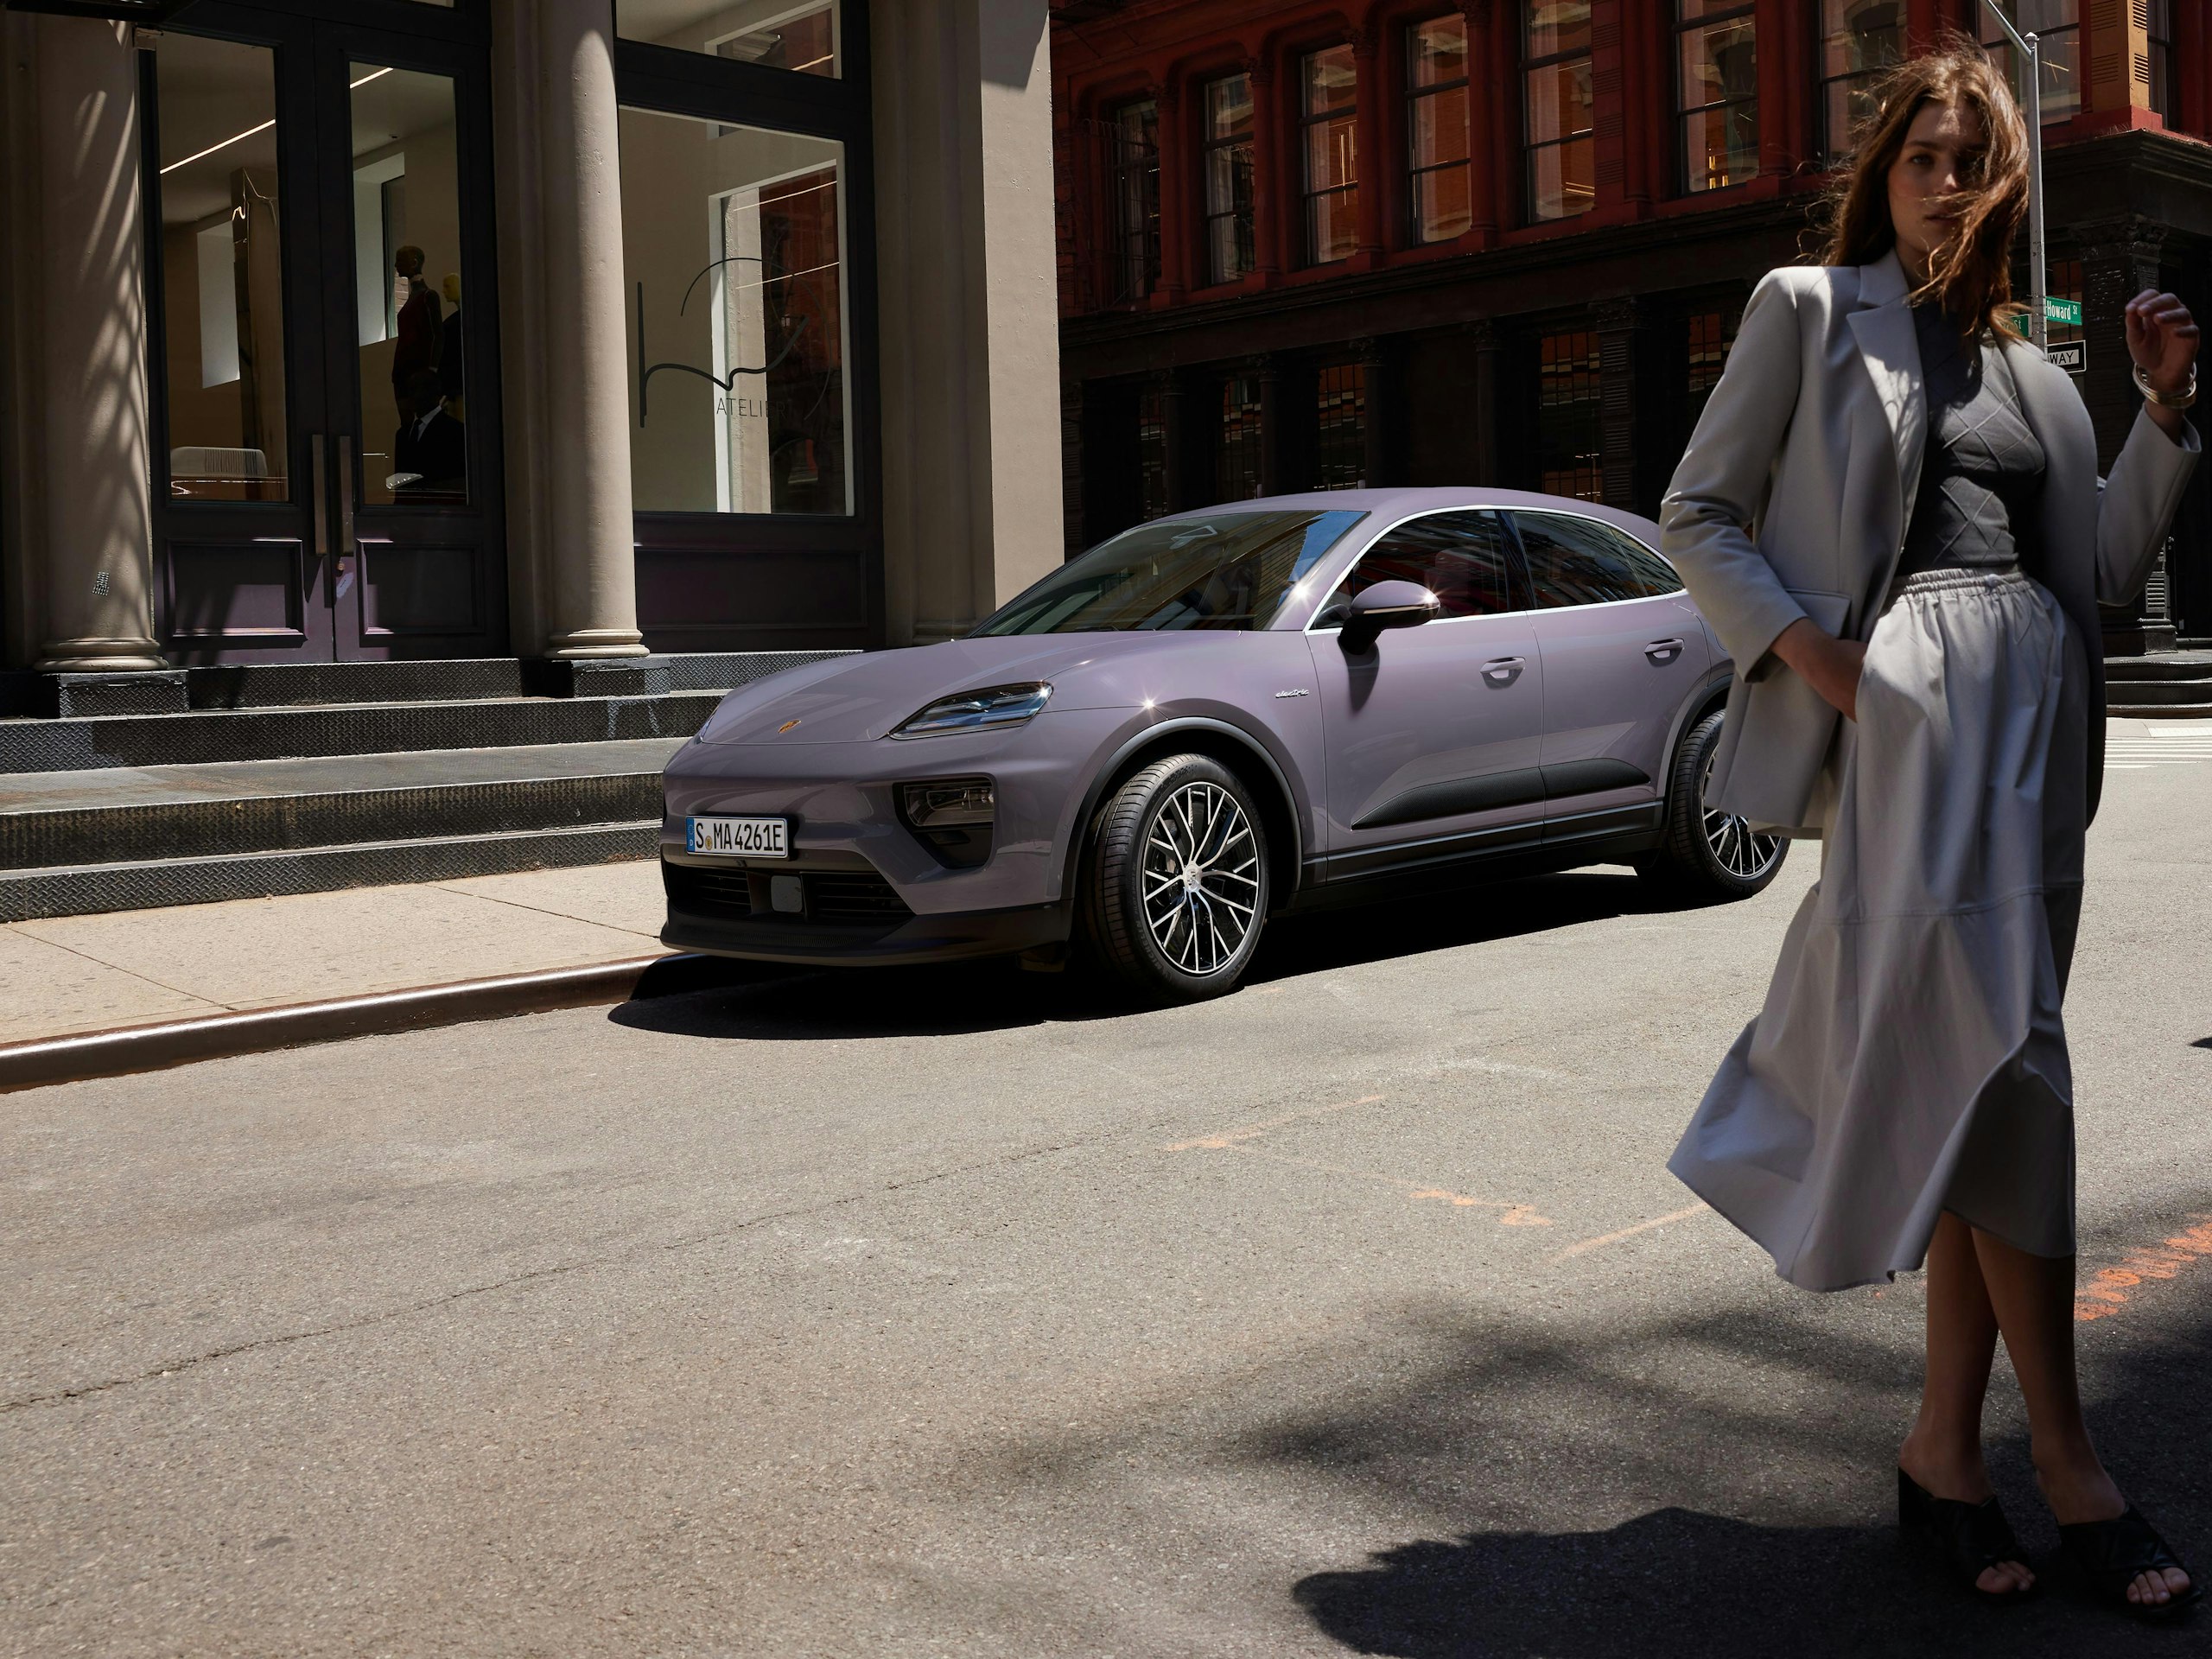 A woman walks in front of a Macan on a city street.